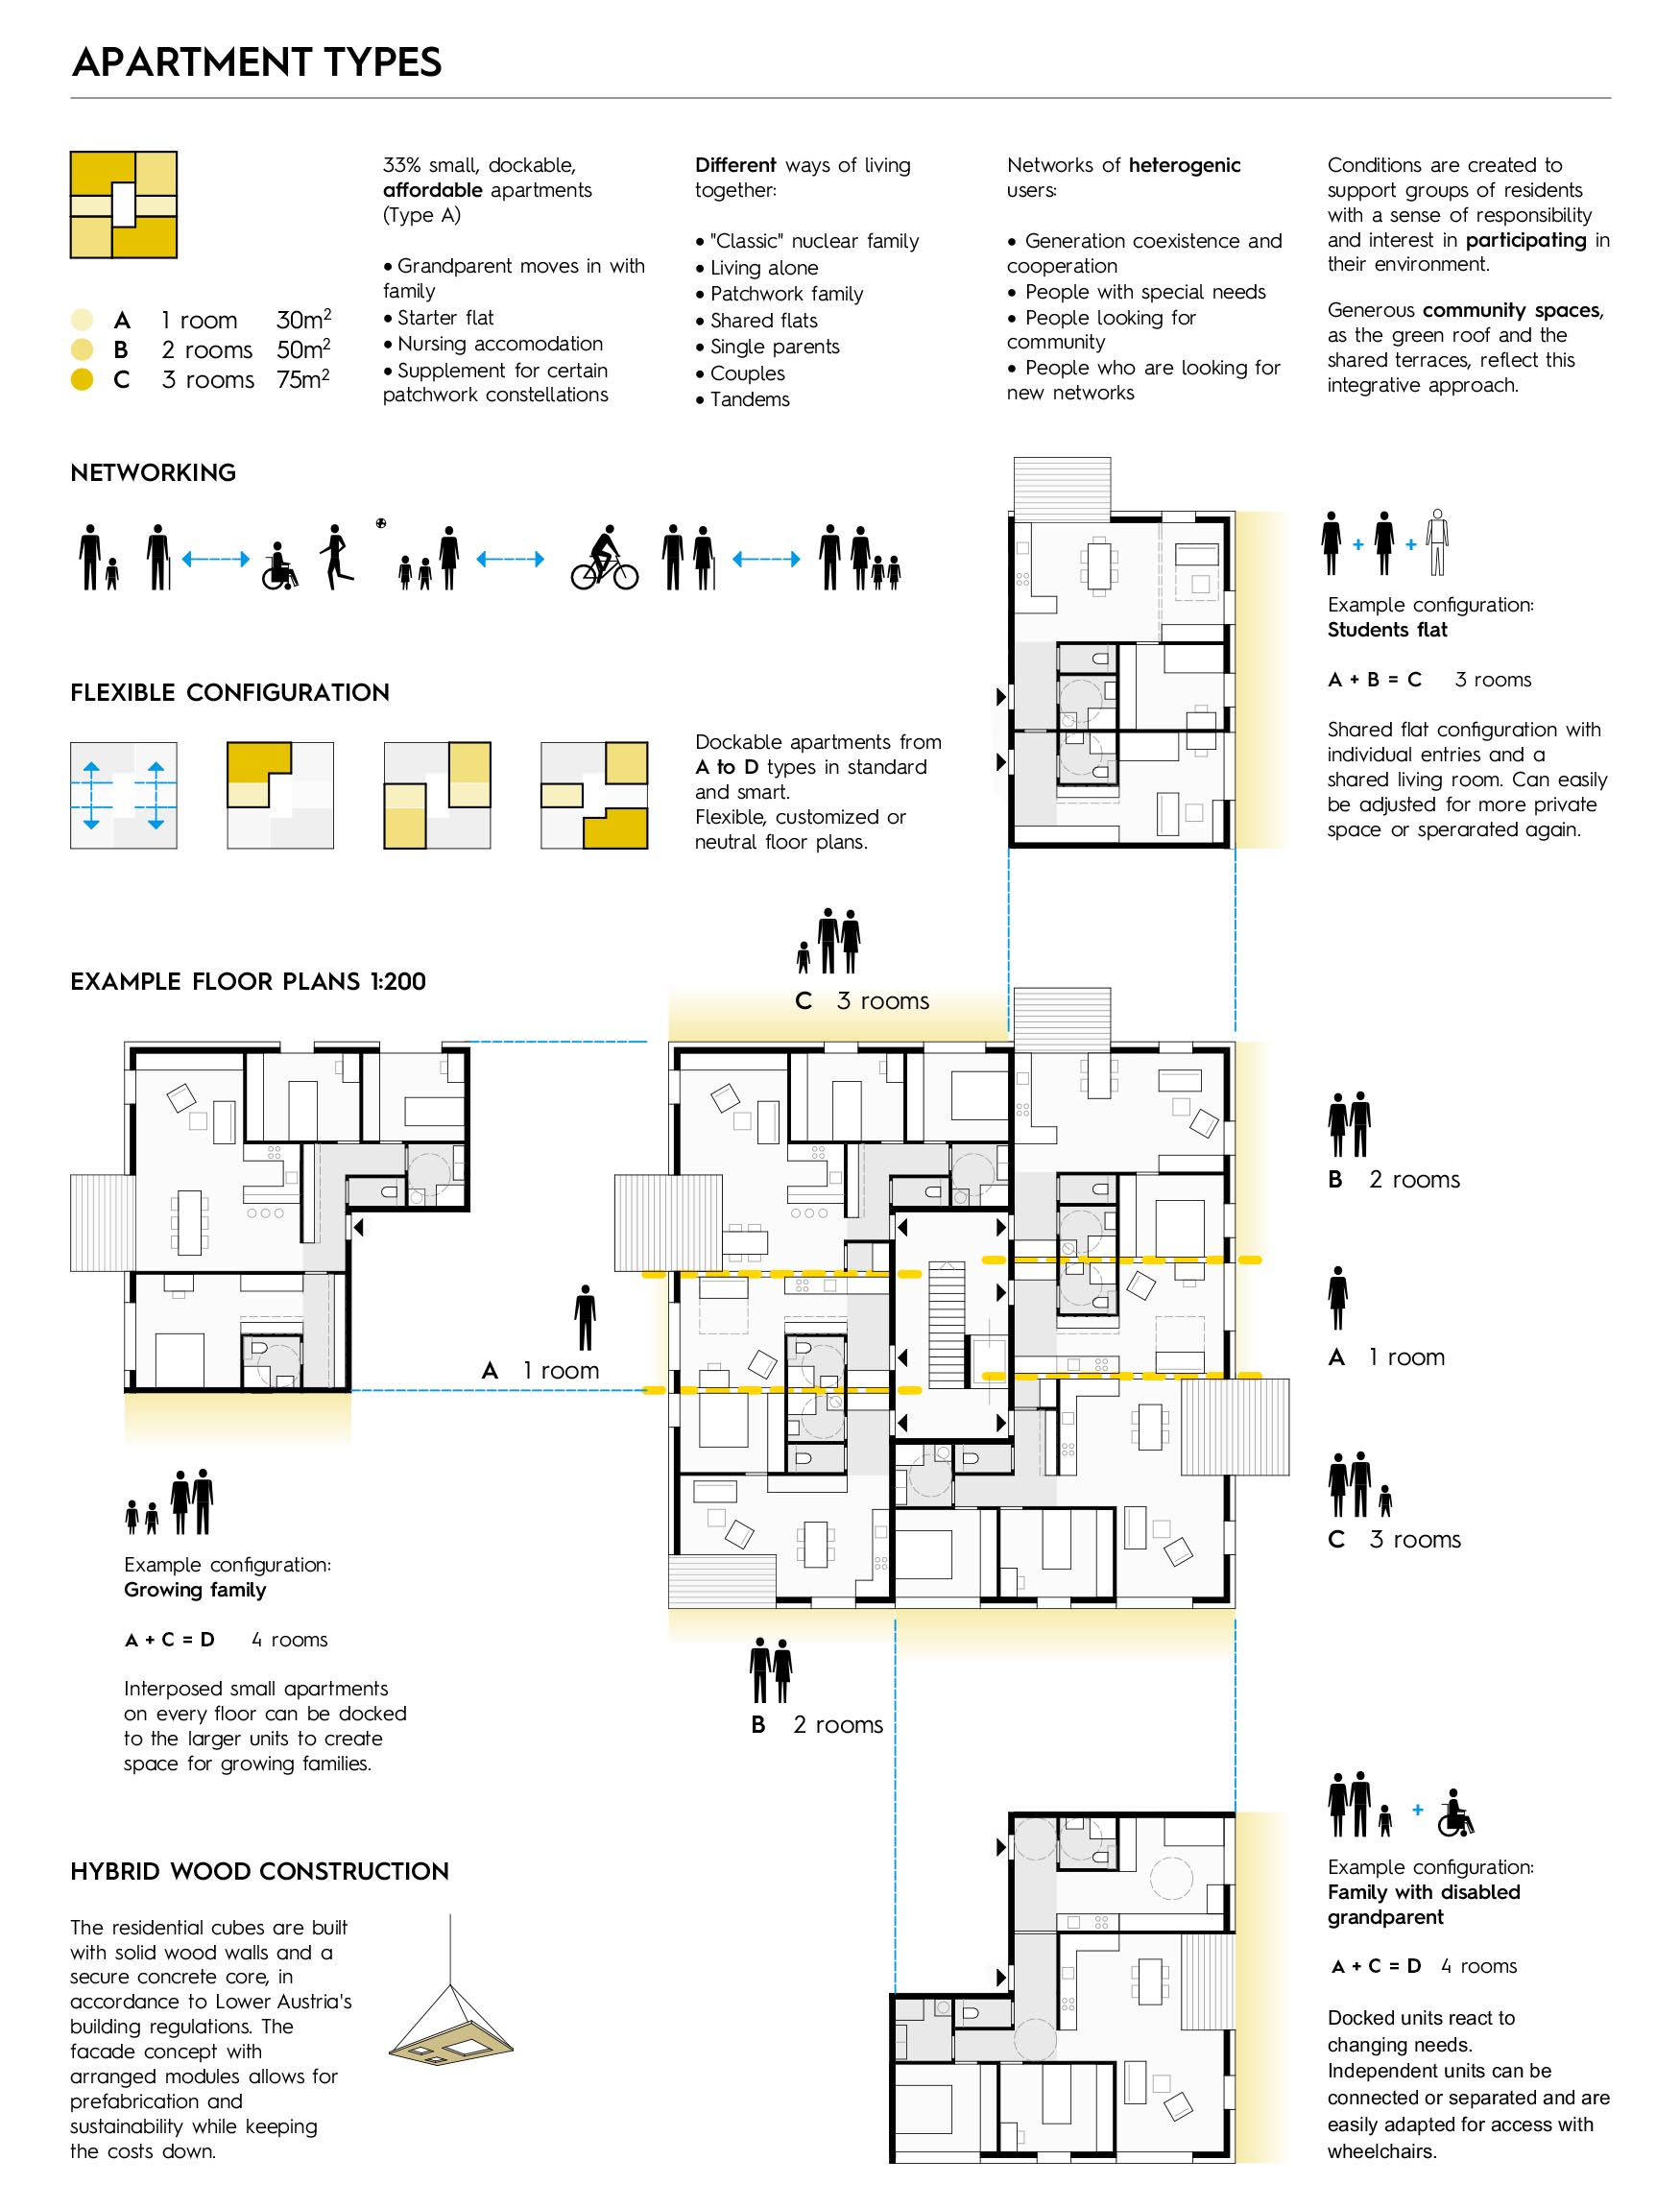 cy architecture_Wettbewerb Europan 13_apartment type